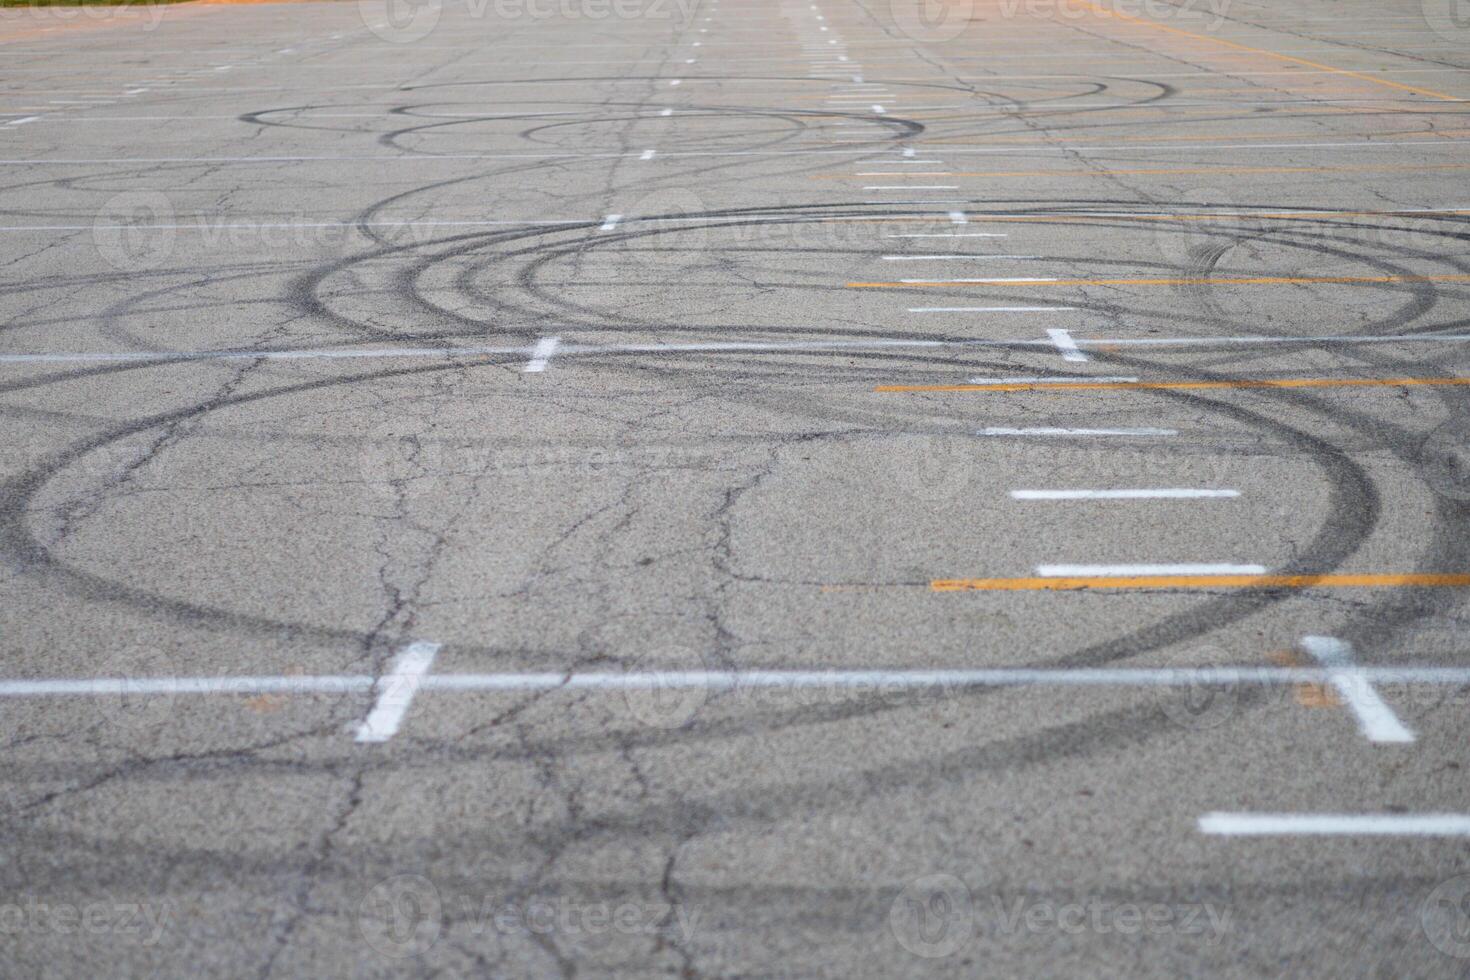 the circular car tracks in the middle of a parking lot photo